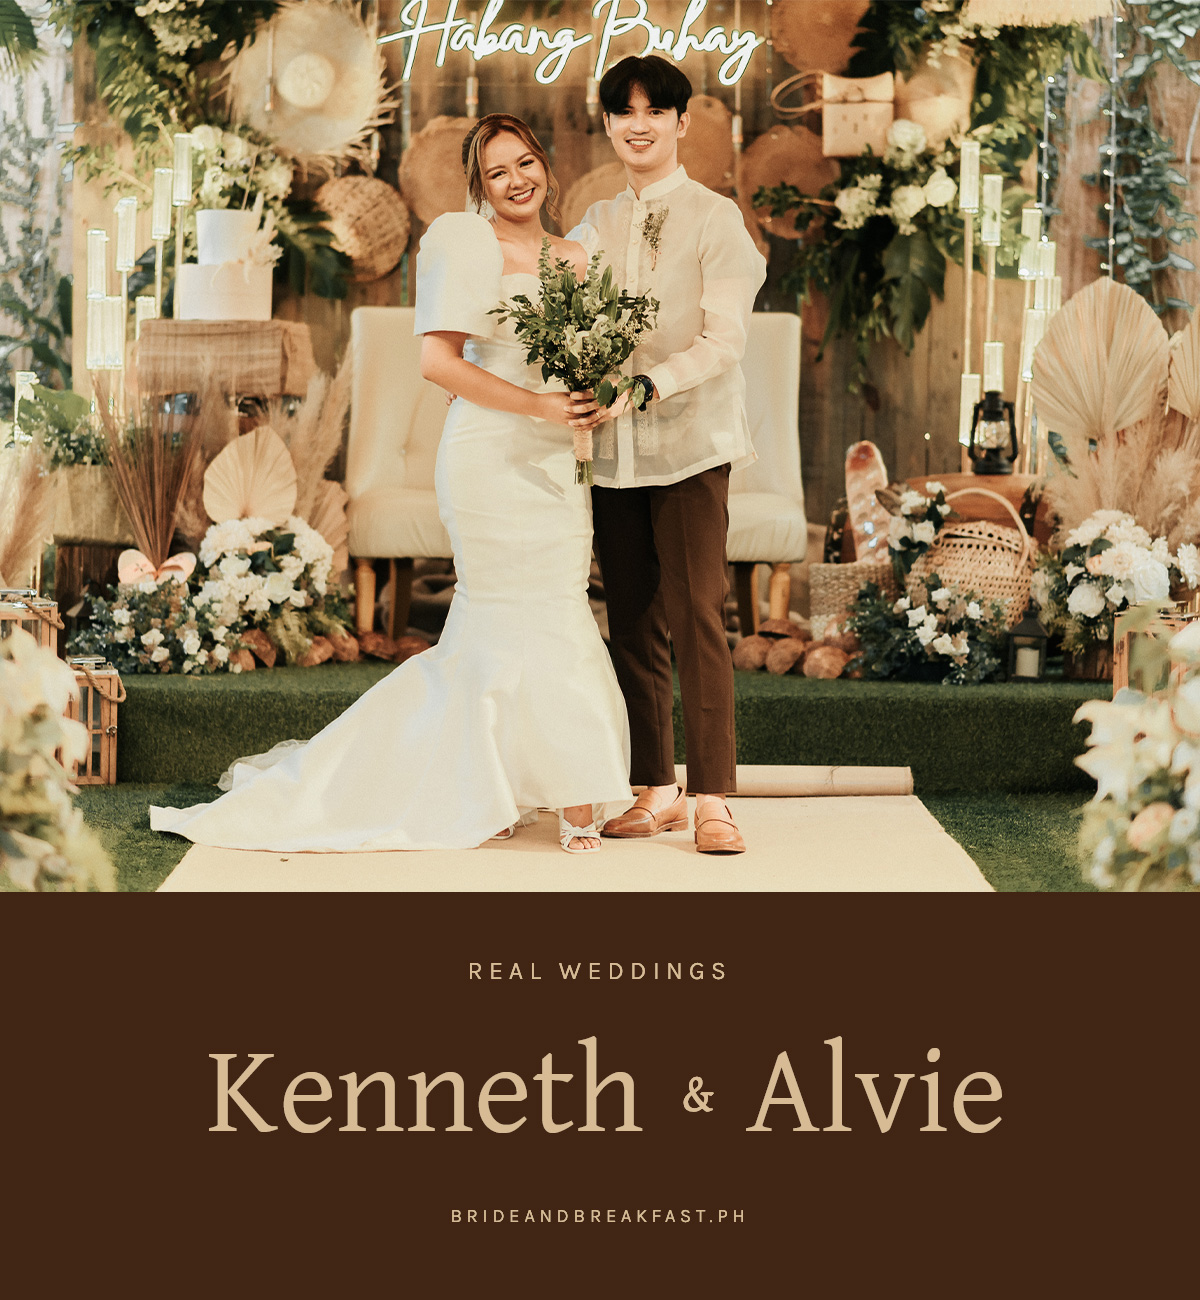 Kenneth and Alvie